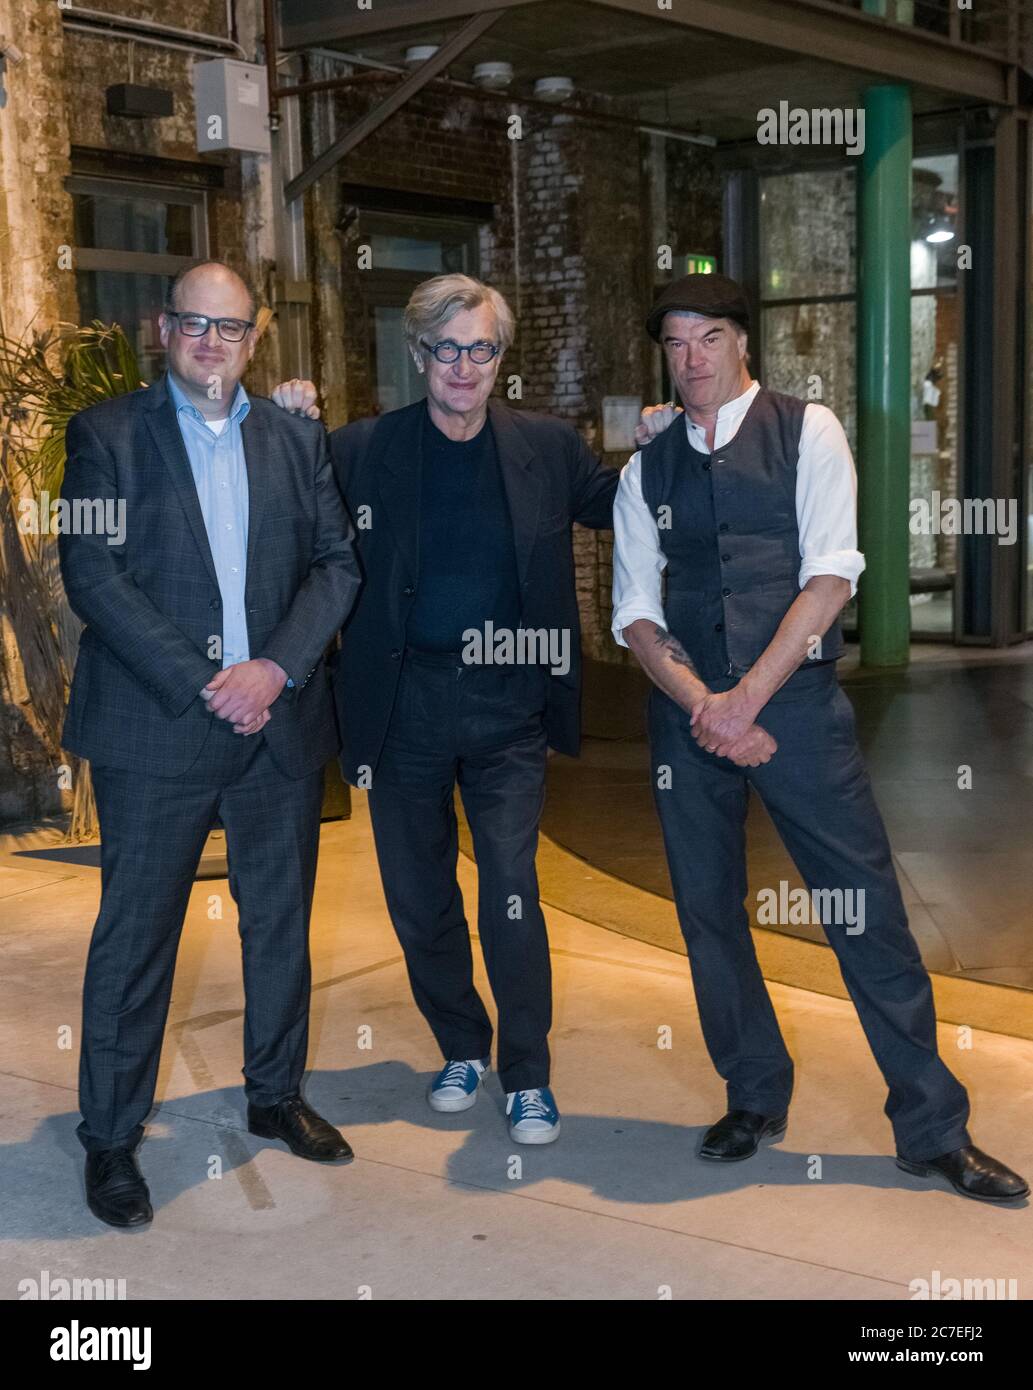 Hamburg, Germany. 16th July, 2020. The film directors Eric Friedler (l-r), Wim Wenders and Andreas 'Campino' Frege are together on the occasion of the Hamburg premiere of the film Desperado at Zeise Kinos. The two directors were given the exclusive opportunity to accompany Wenders through his everyday life as an artist and to make portraits. Credit: Markus Scholz/dpa/Alamy Live News Stock Photo